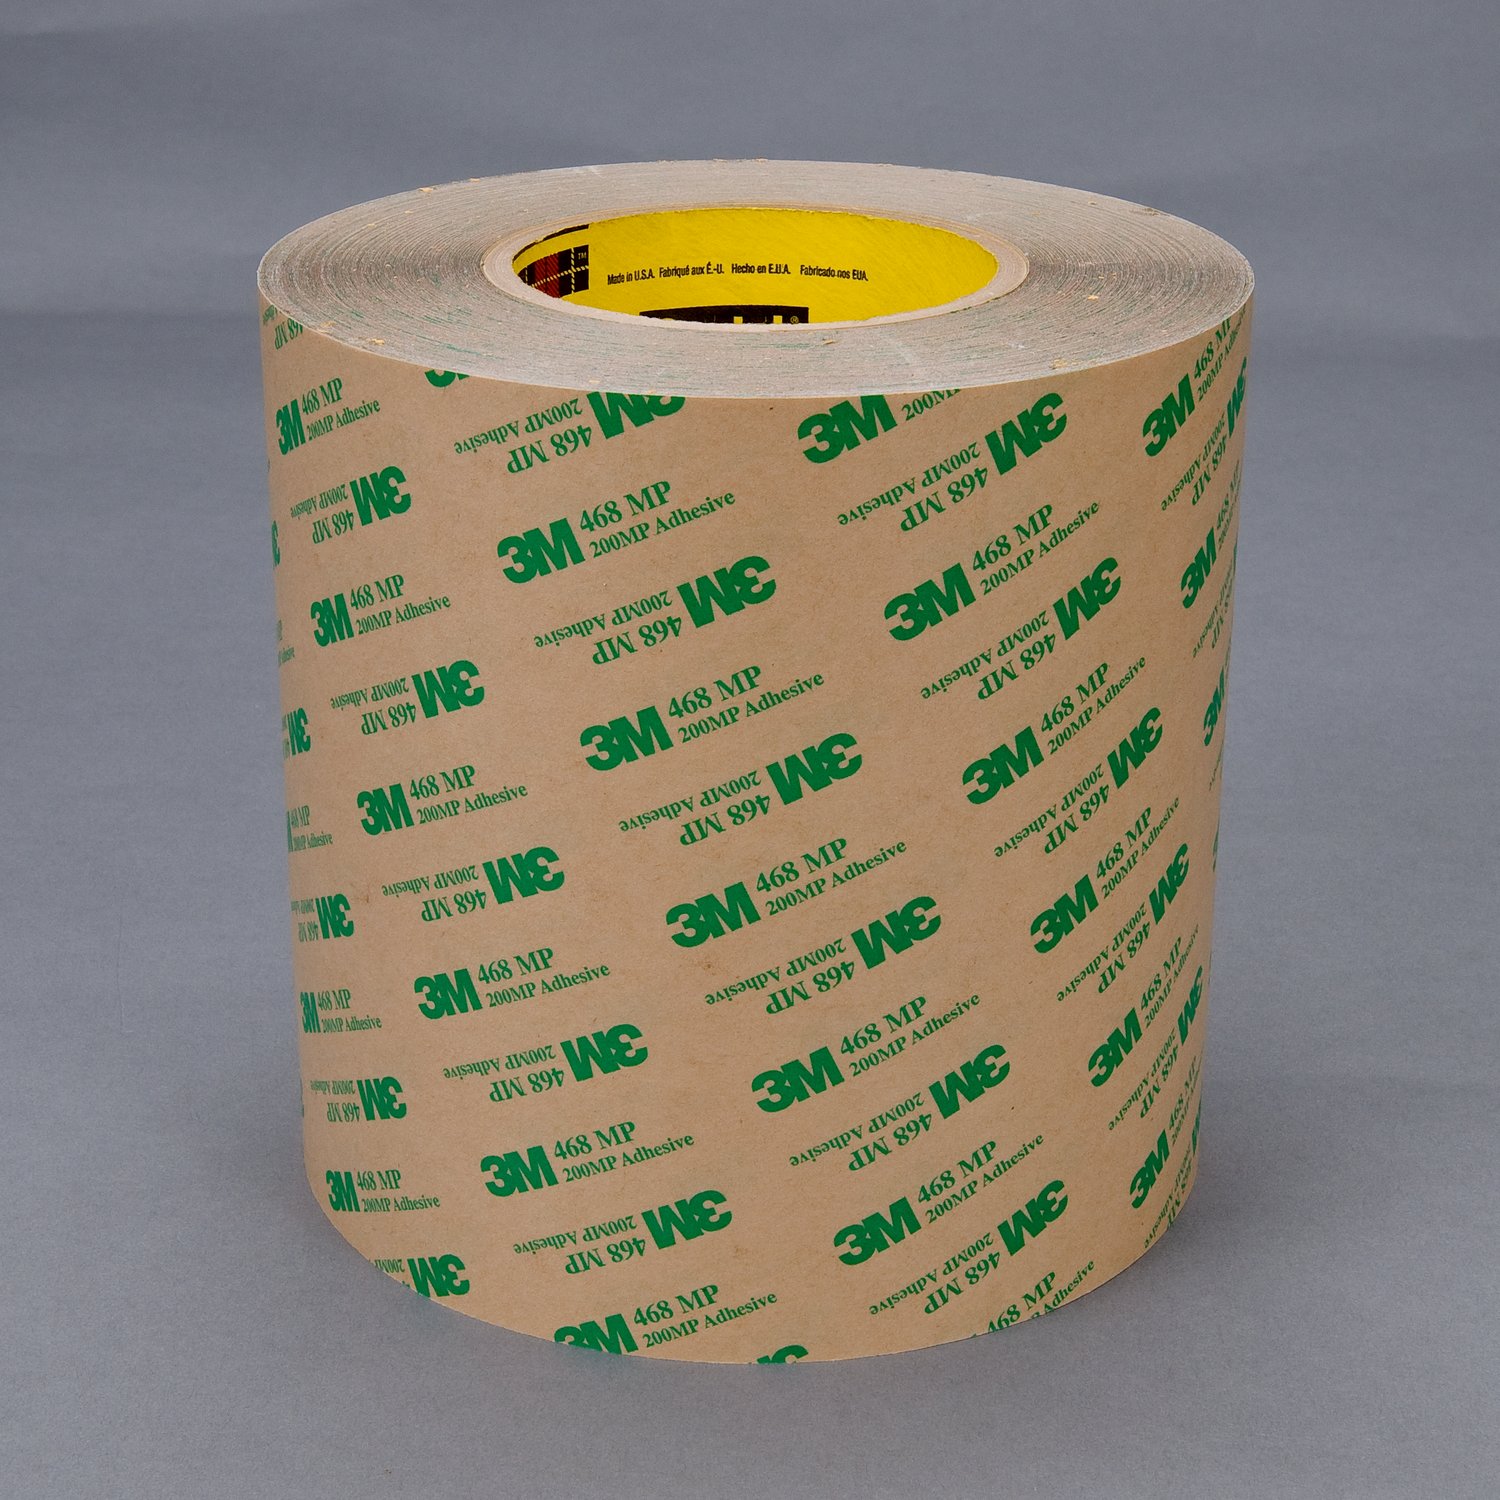 7000115503 - 3M Adhesive Transfer Tape 468MP, Clear, 12 in x 60 yd, 5 mil, 4 rolls
per case